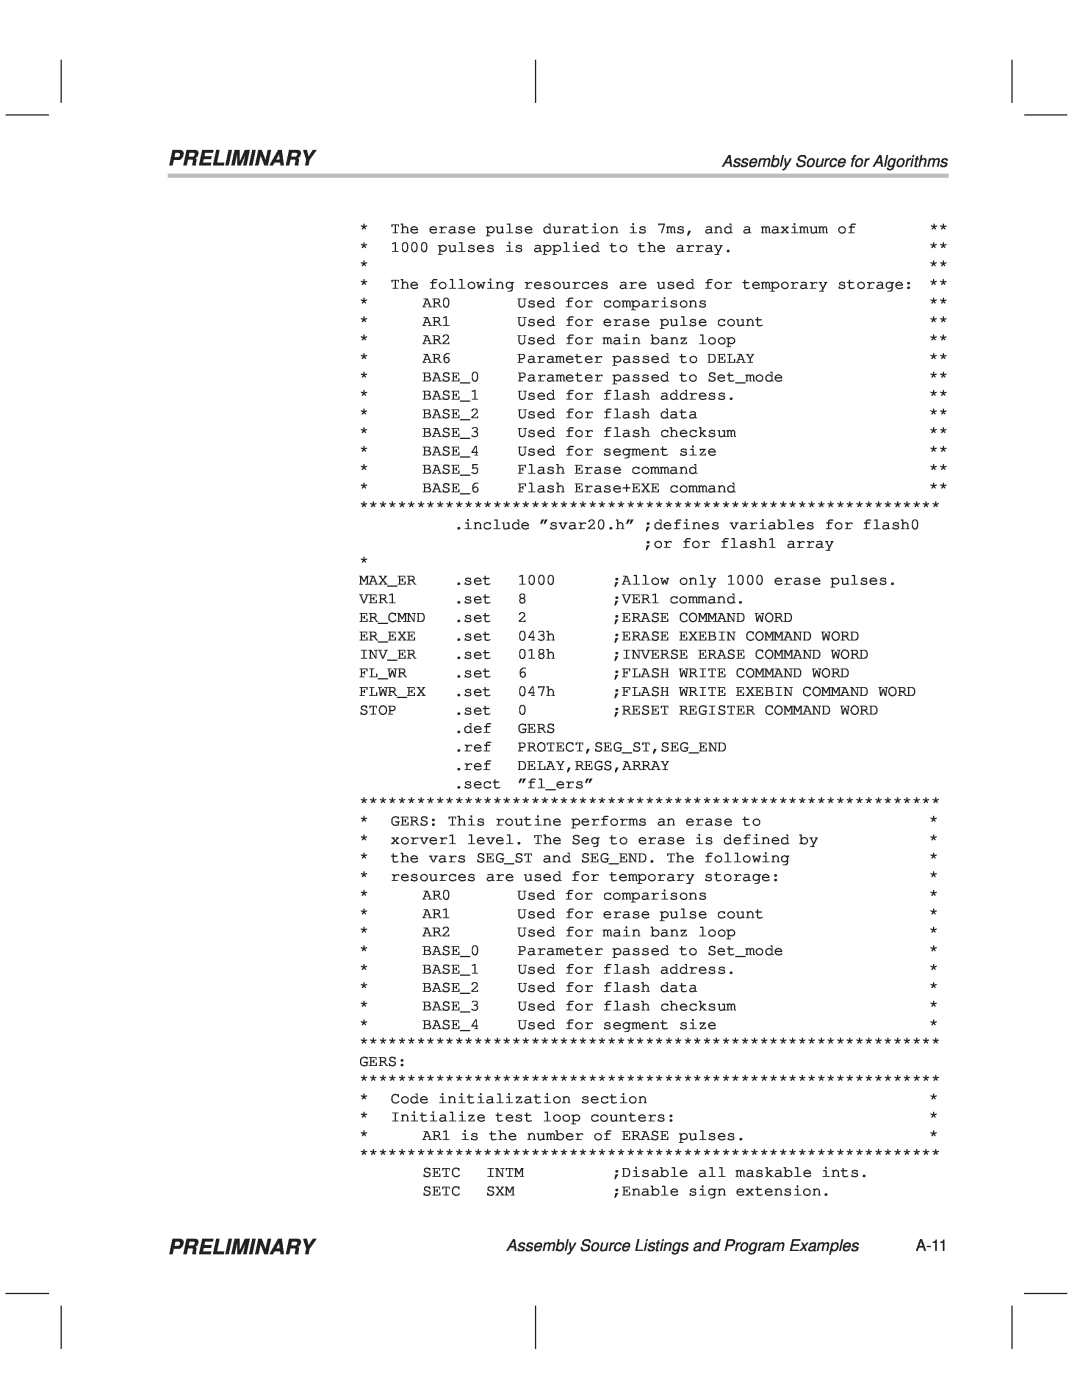 Texas Instruments TMS320F20x/F24x DSP manual Preliminary, Assembly Source for Algorithms, A-11 